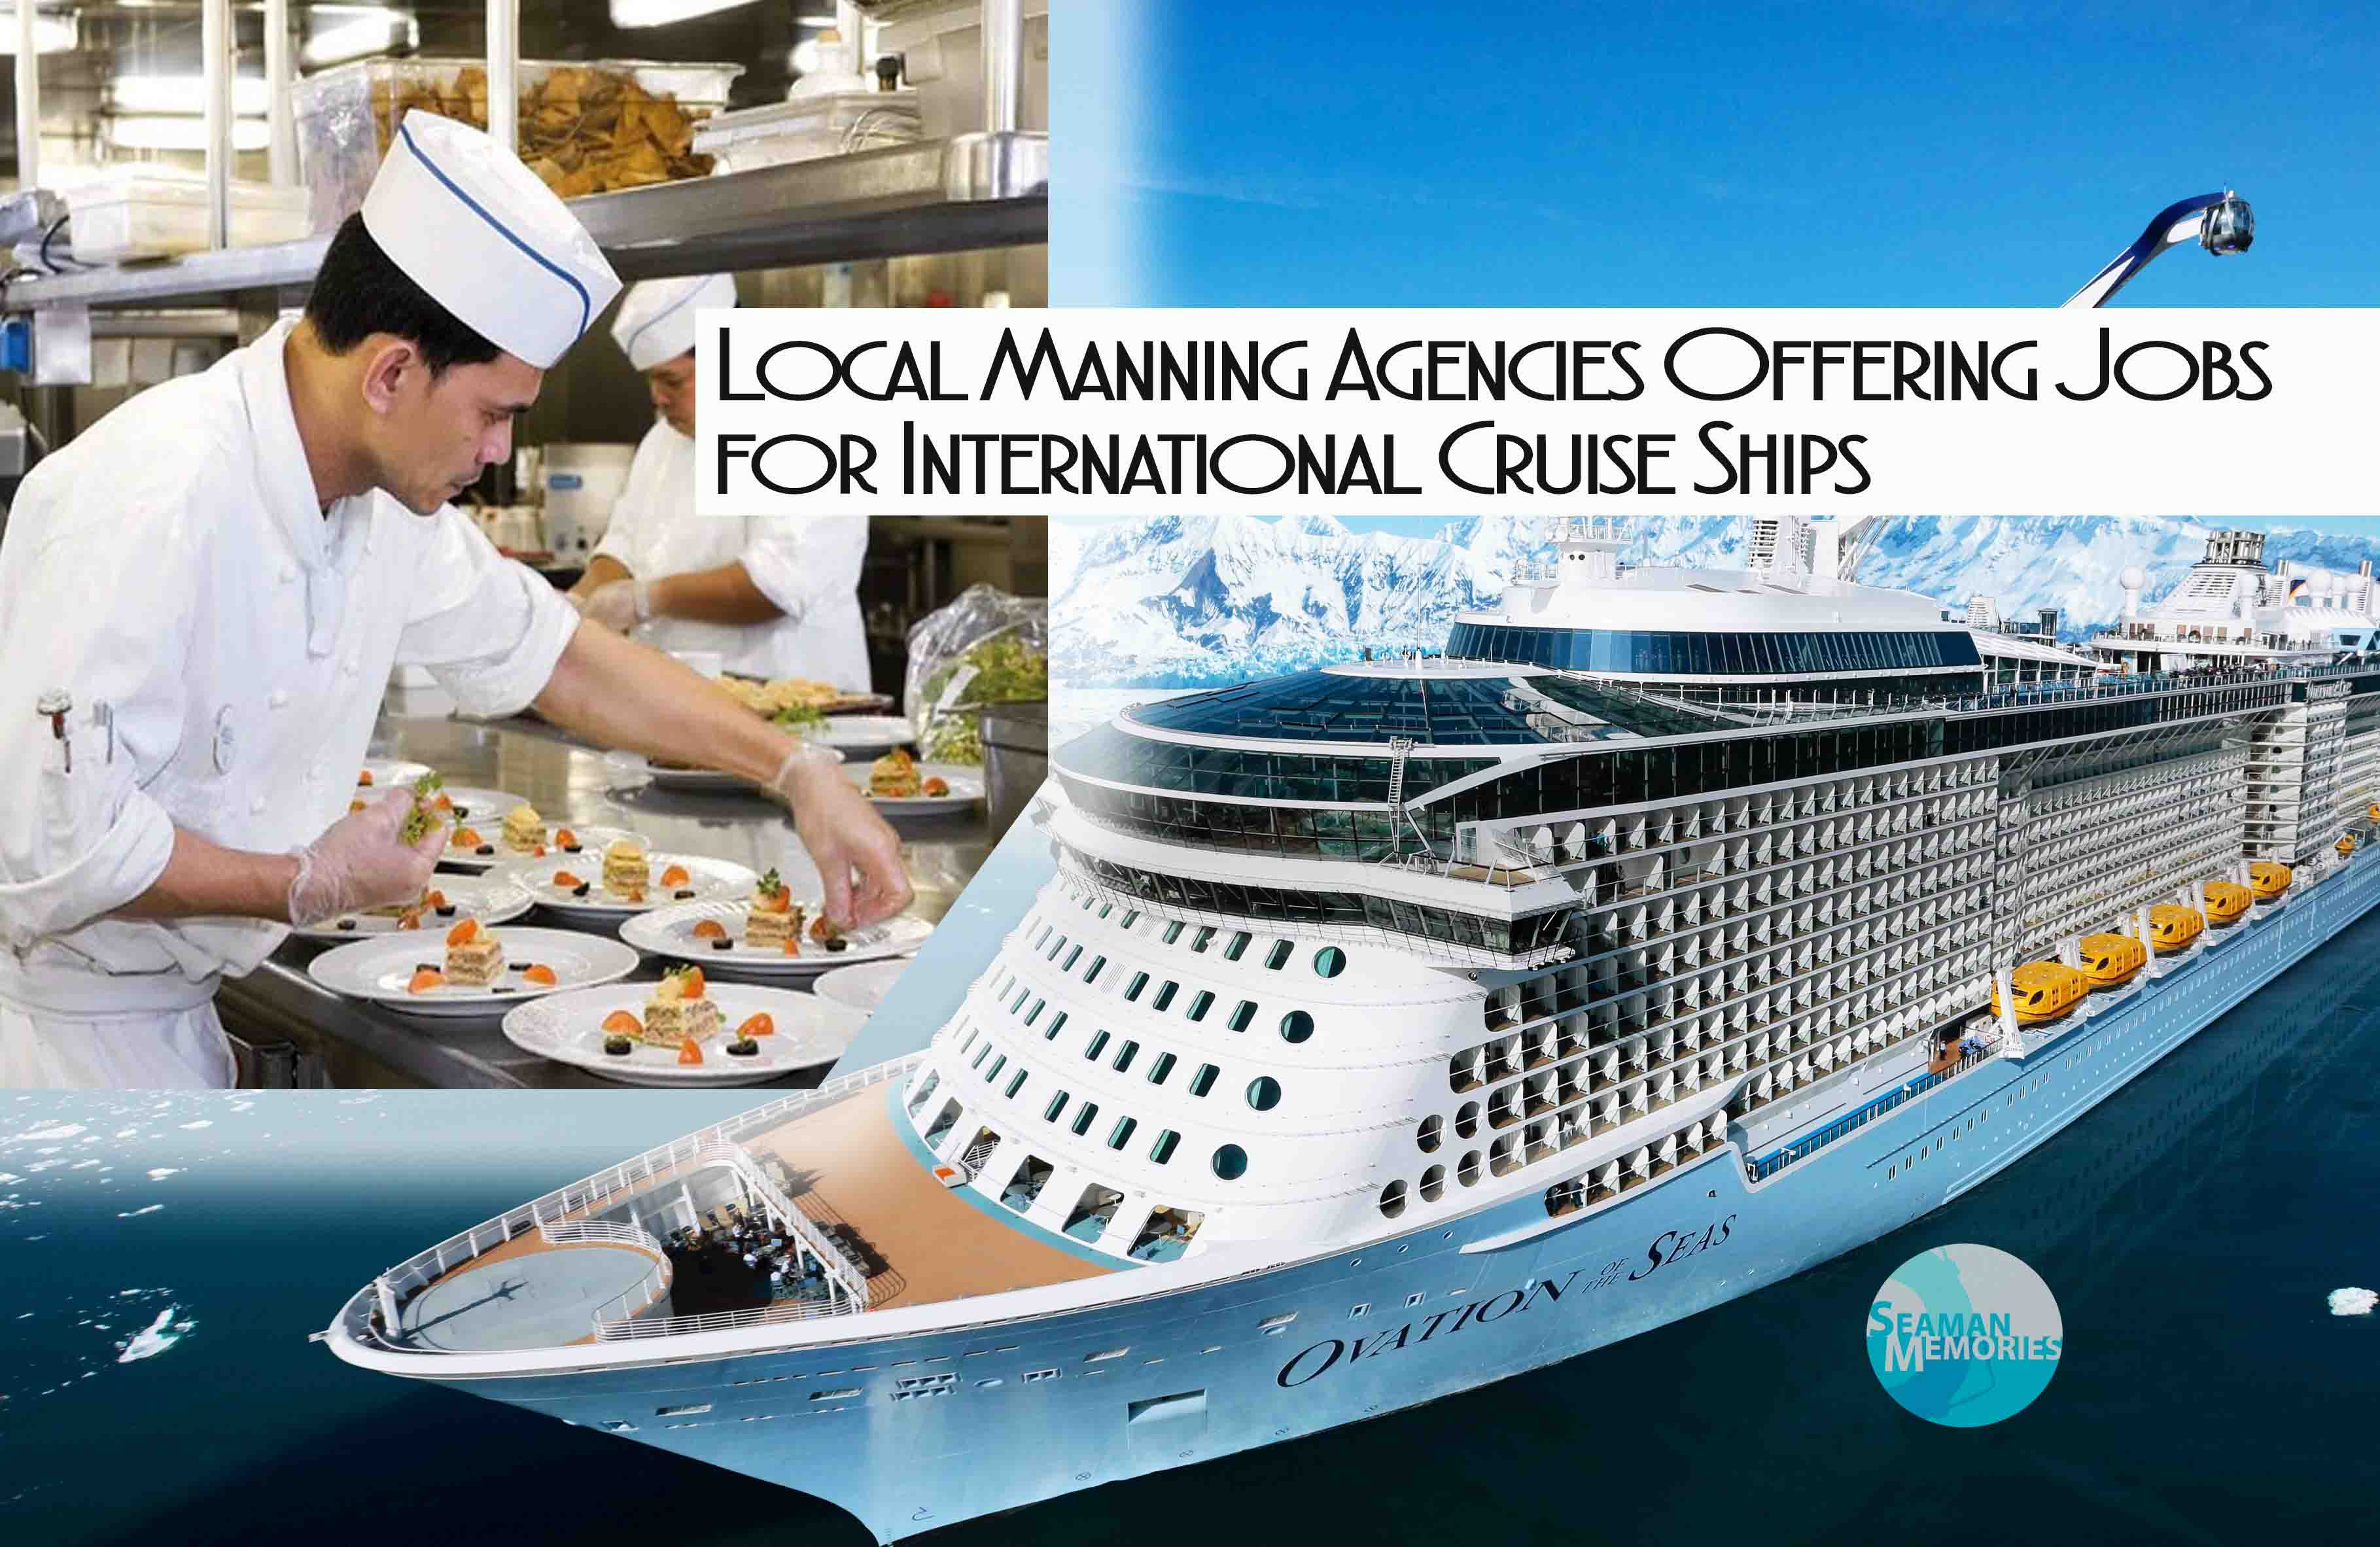 do cruise ships hire lpns